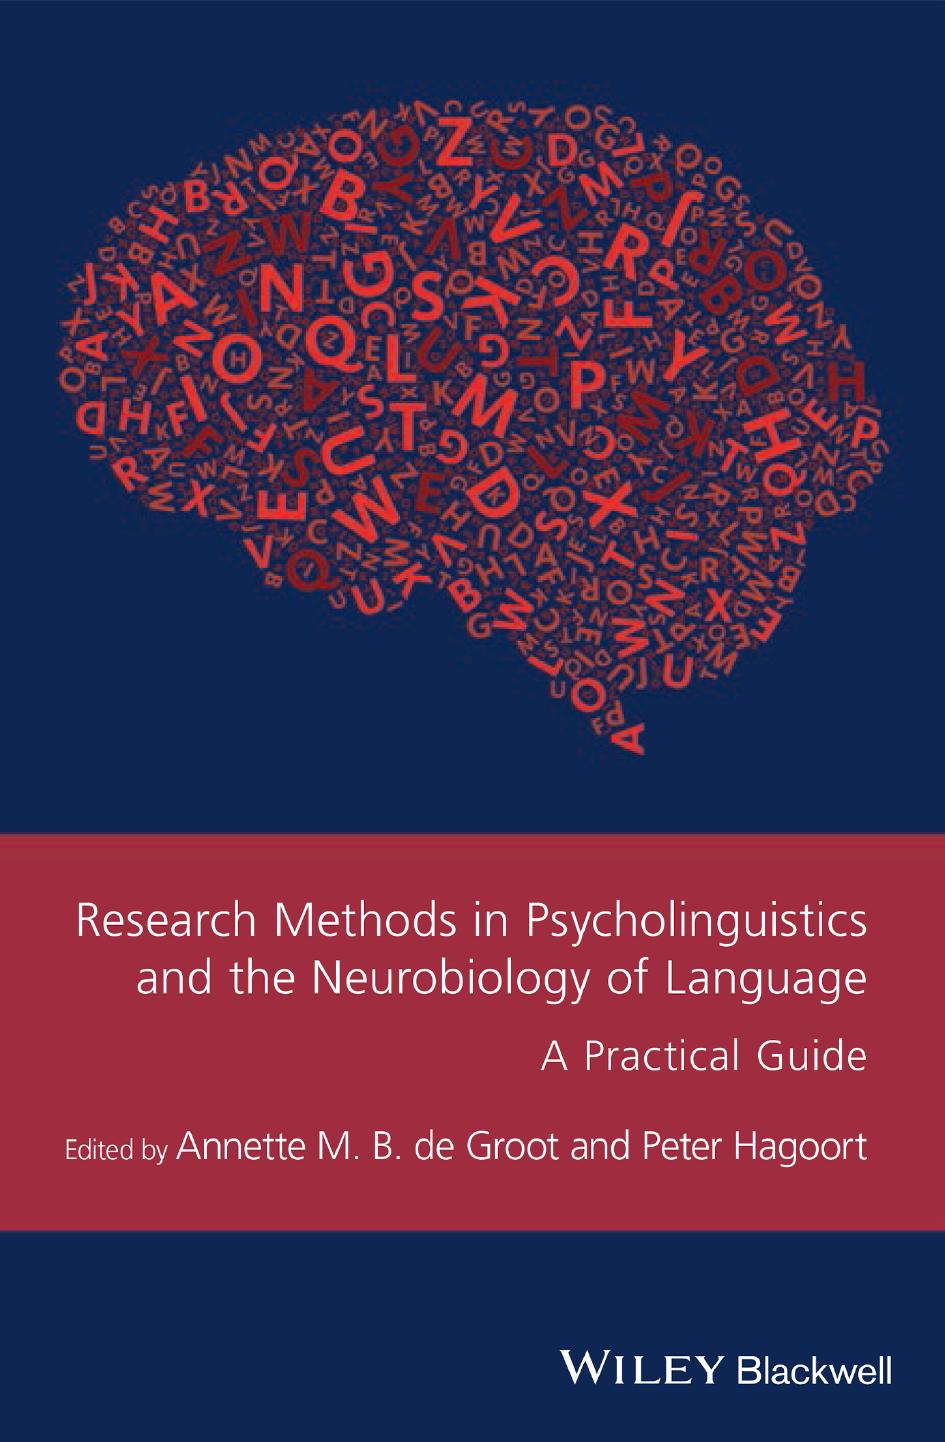 Research Methods in Psycholinguistics and the Neurobiology, 2017